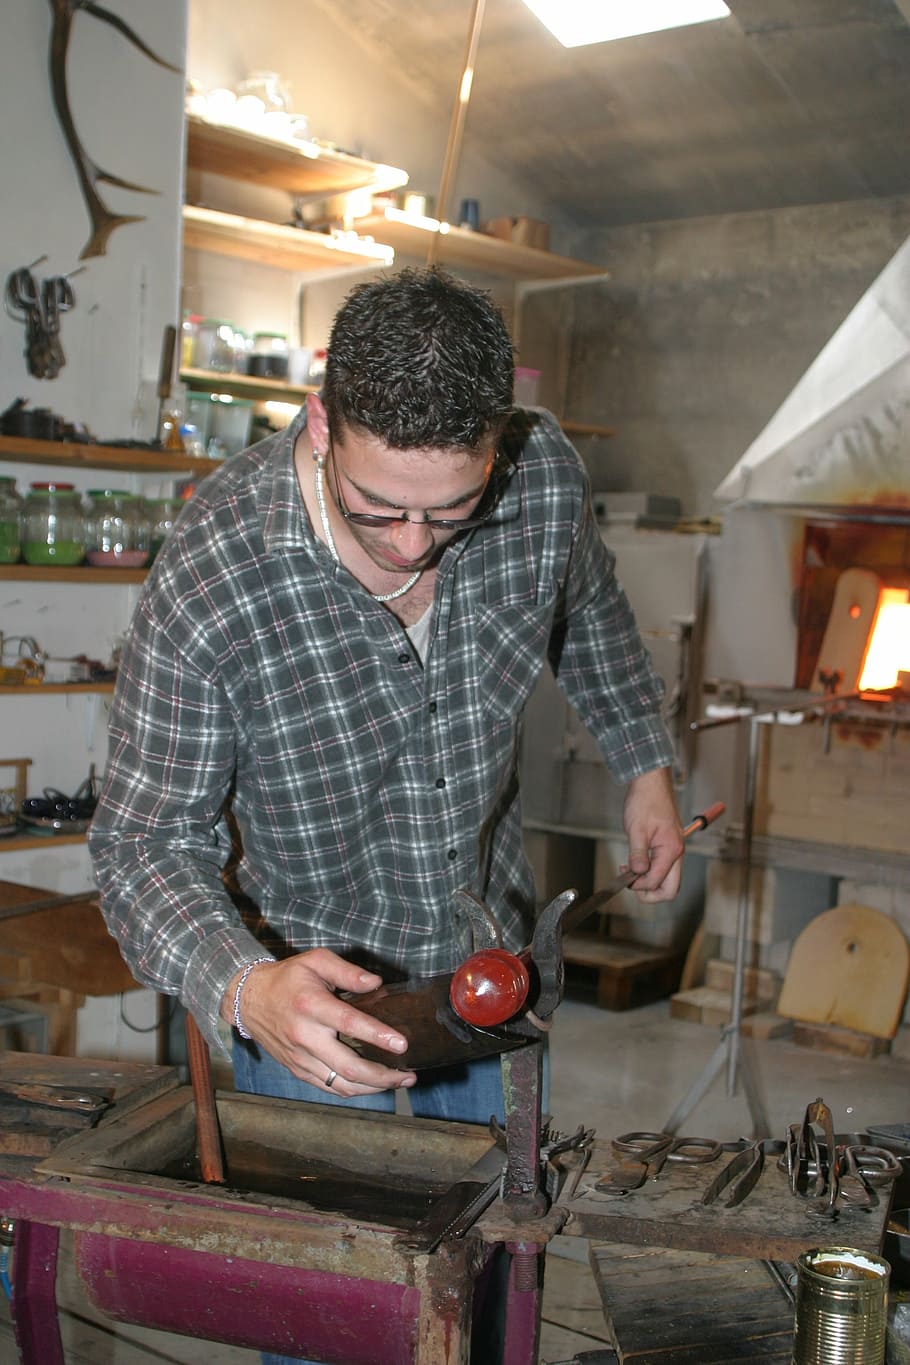 glass blower, bavarian forest, bavaria, craft, real people, one person, indoors, standing, casual clothing, occupation